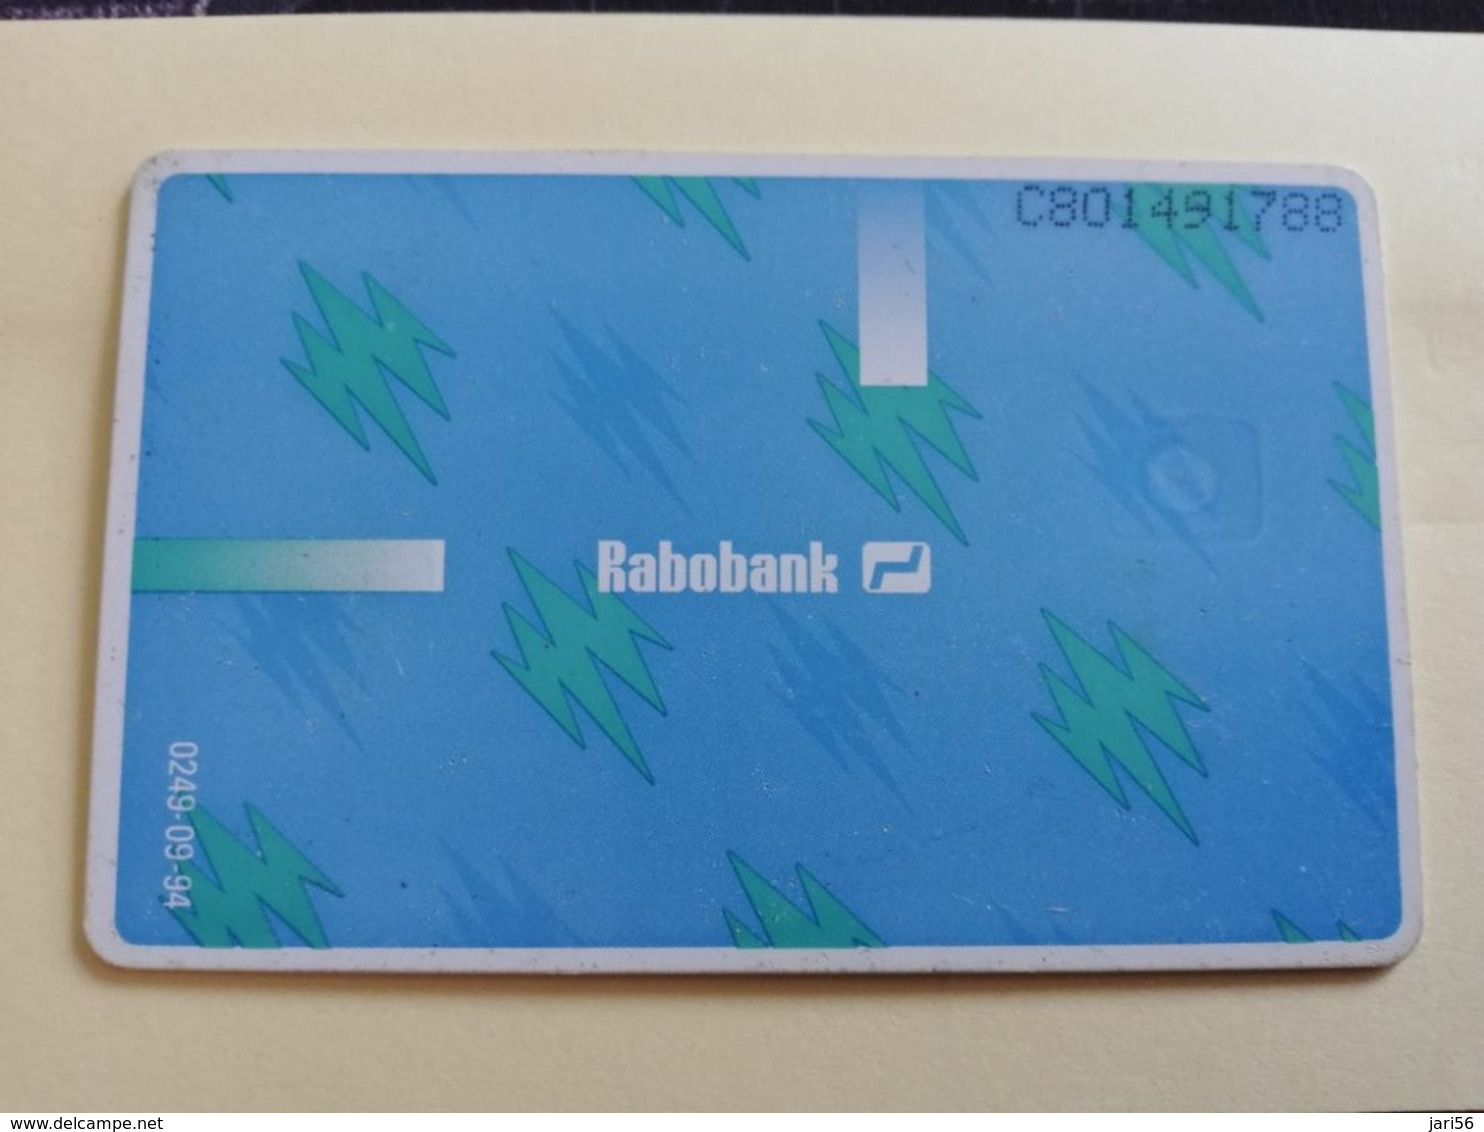 NETHERLANDS  ADVERTISING CHIPCARD HFL 2,50 CRD 016   RABOBANK     Fine Used   ** 3164** - Privat